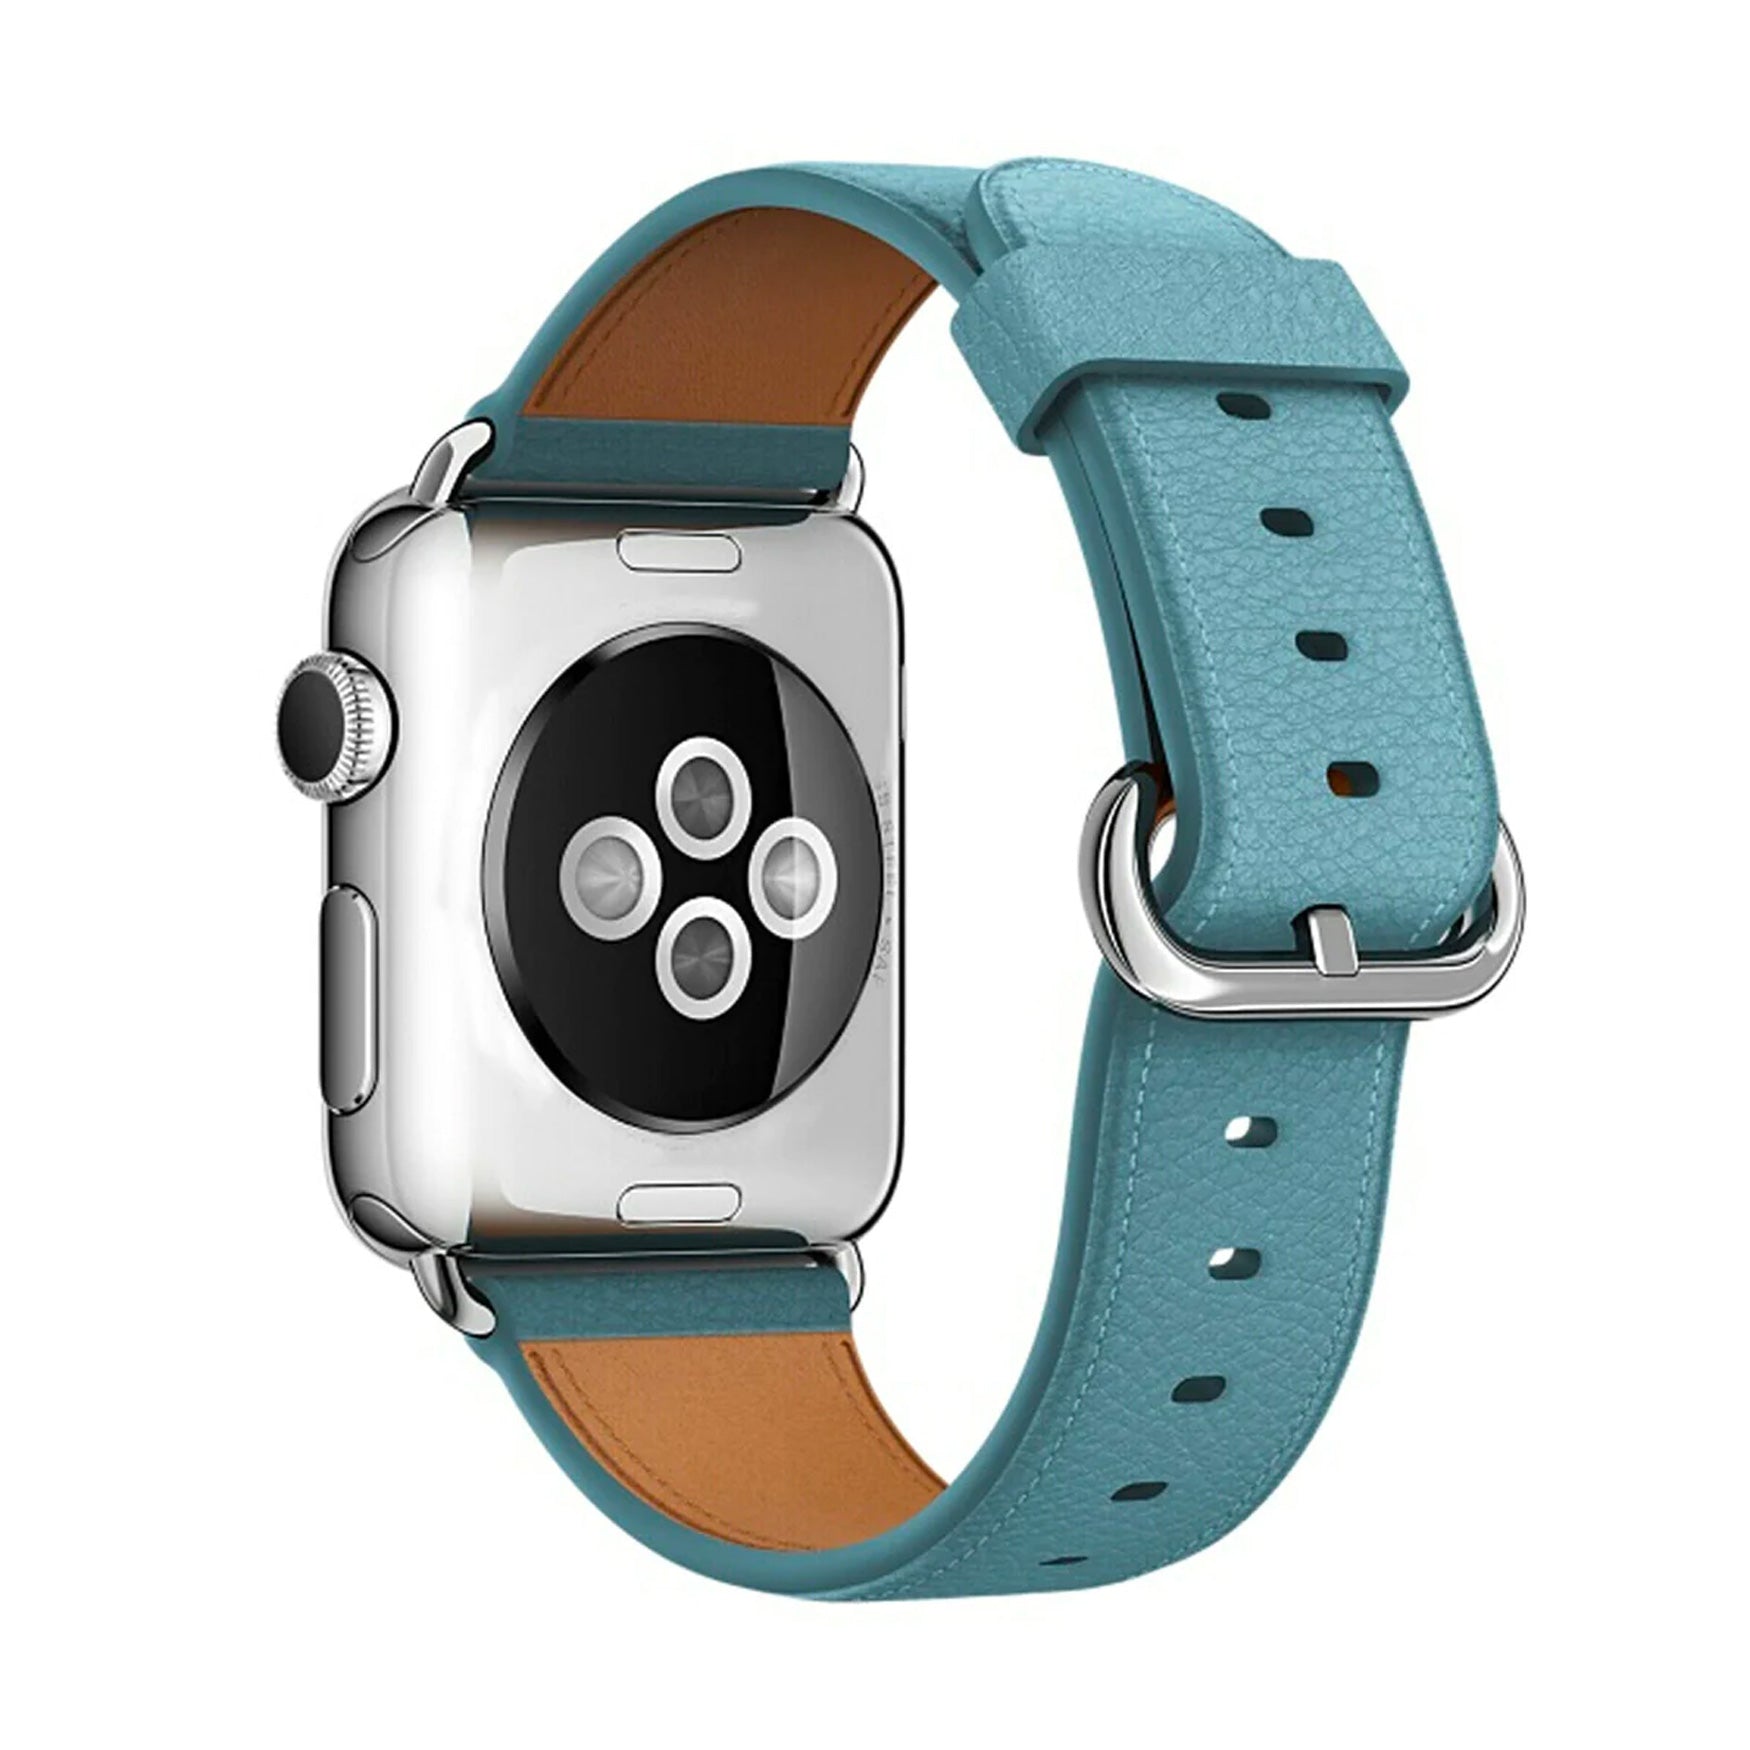 Gullane Teal Watch Strap For Apple